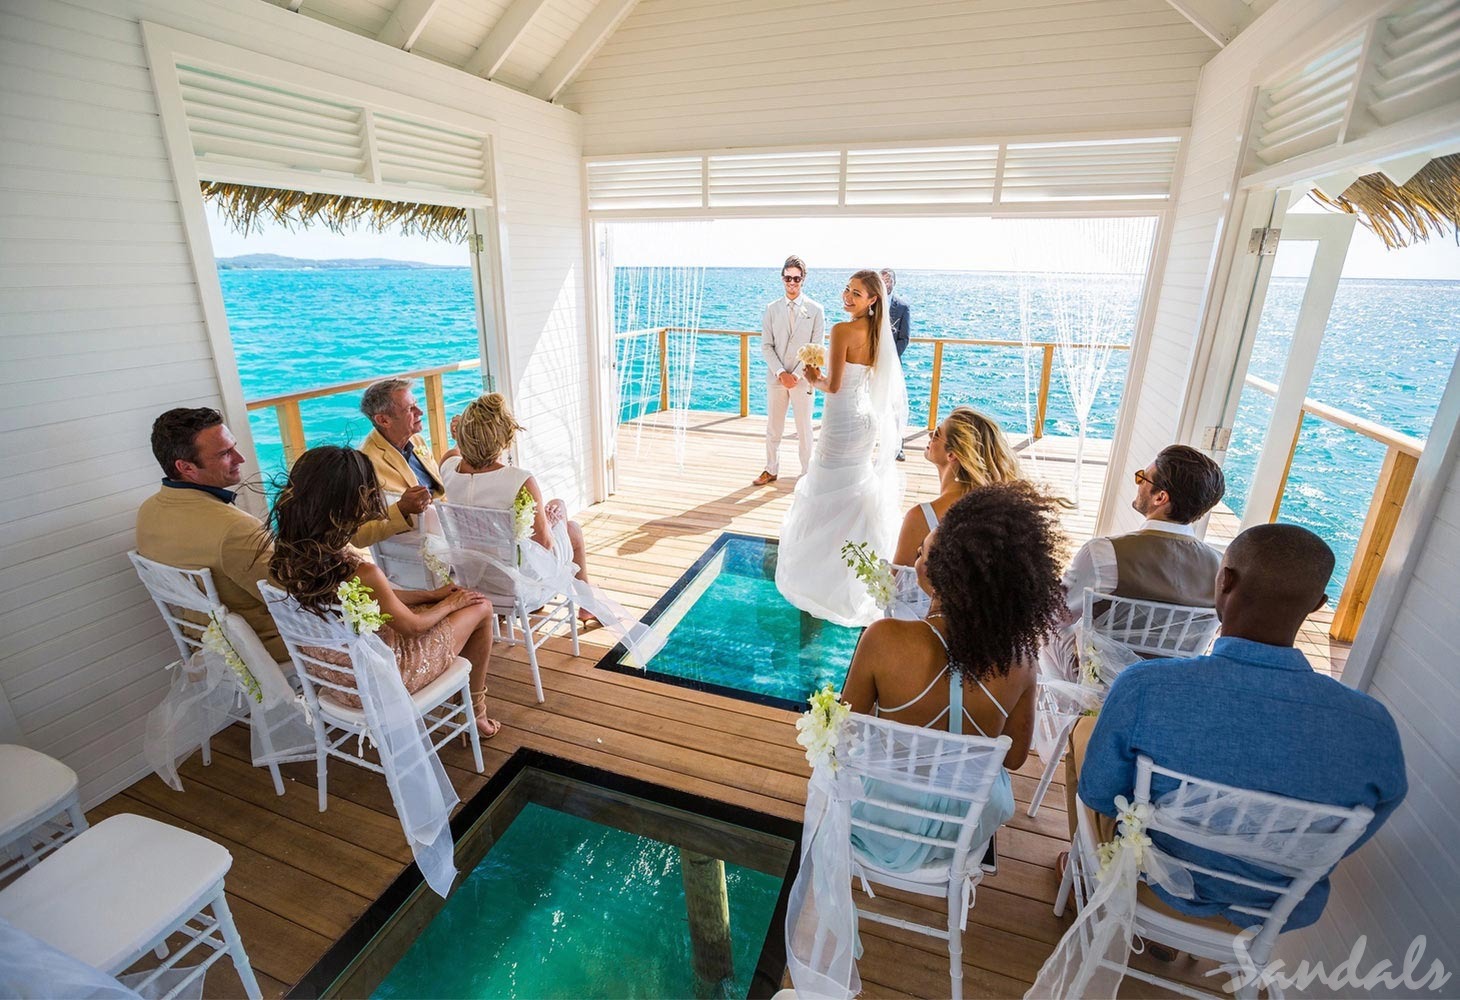 Sandals Resorts Weddings: Features and Scenery for Your Destination Wedding from 2 Travel Anywhere